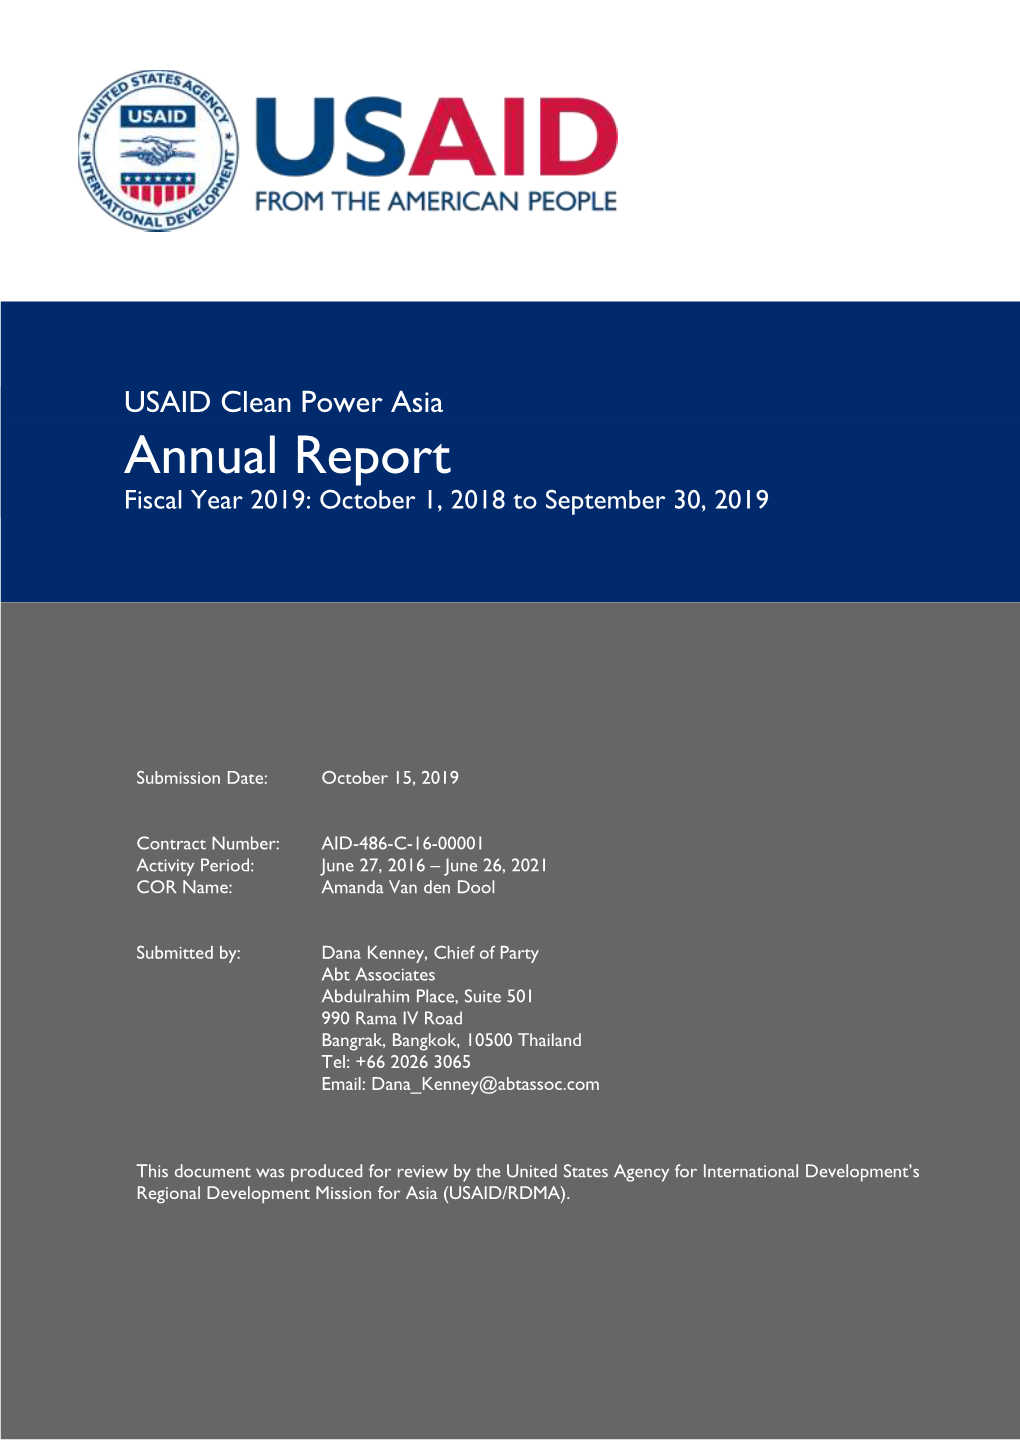 USAID Clean Power Asia Annual Report Fiscal Year 2019: October 1, 2018 to September 30, 2019